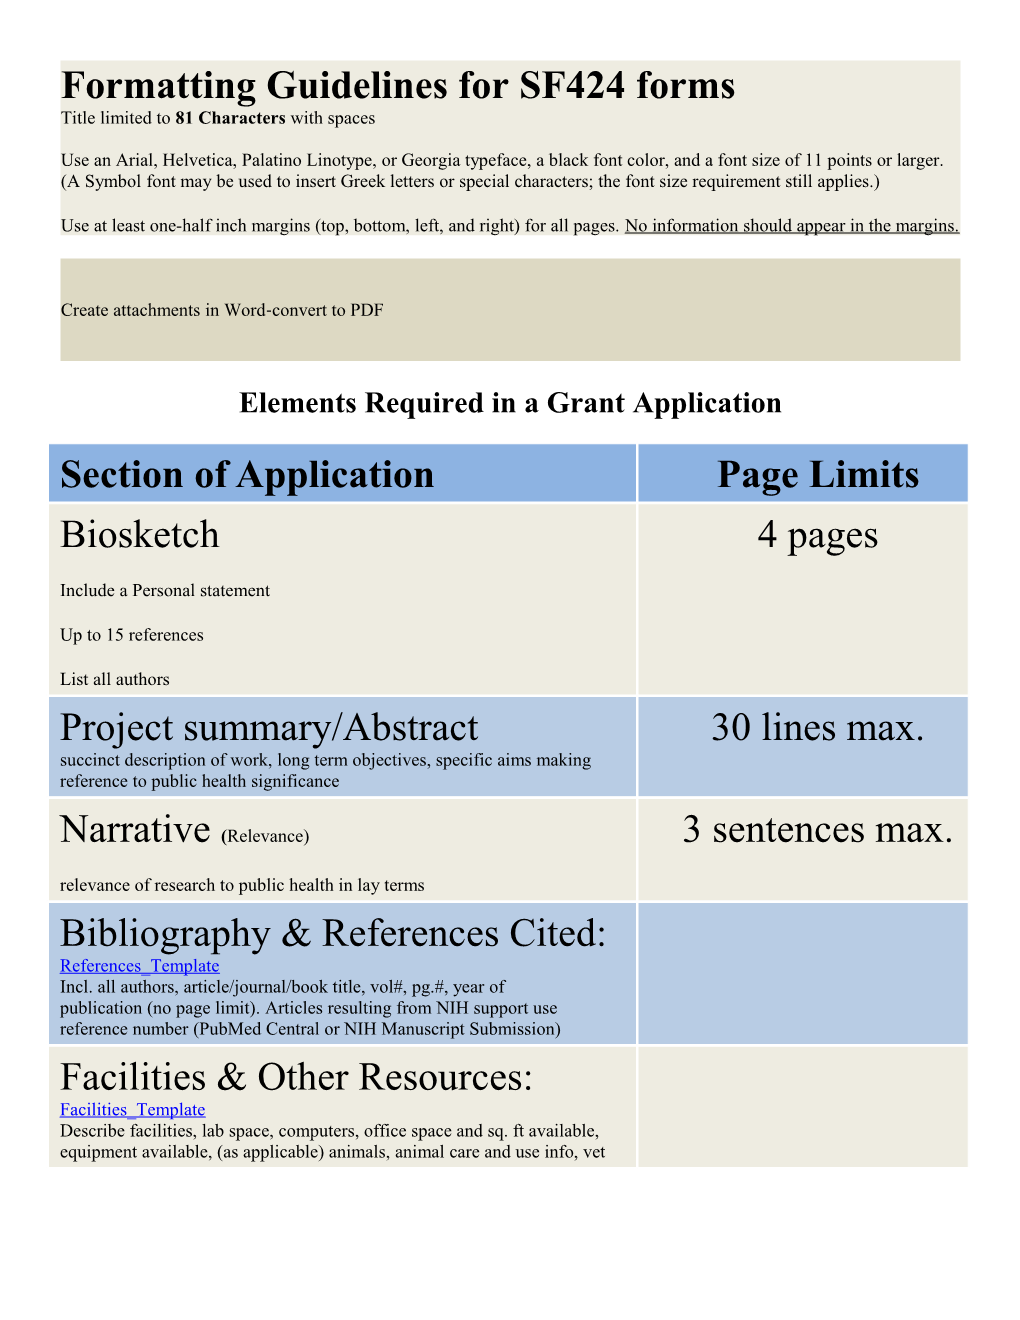 Elements Required in a Grant Application